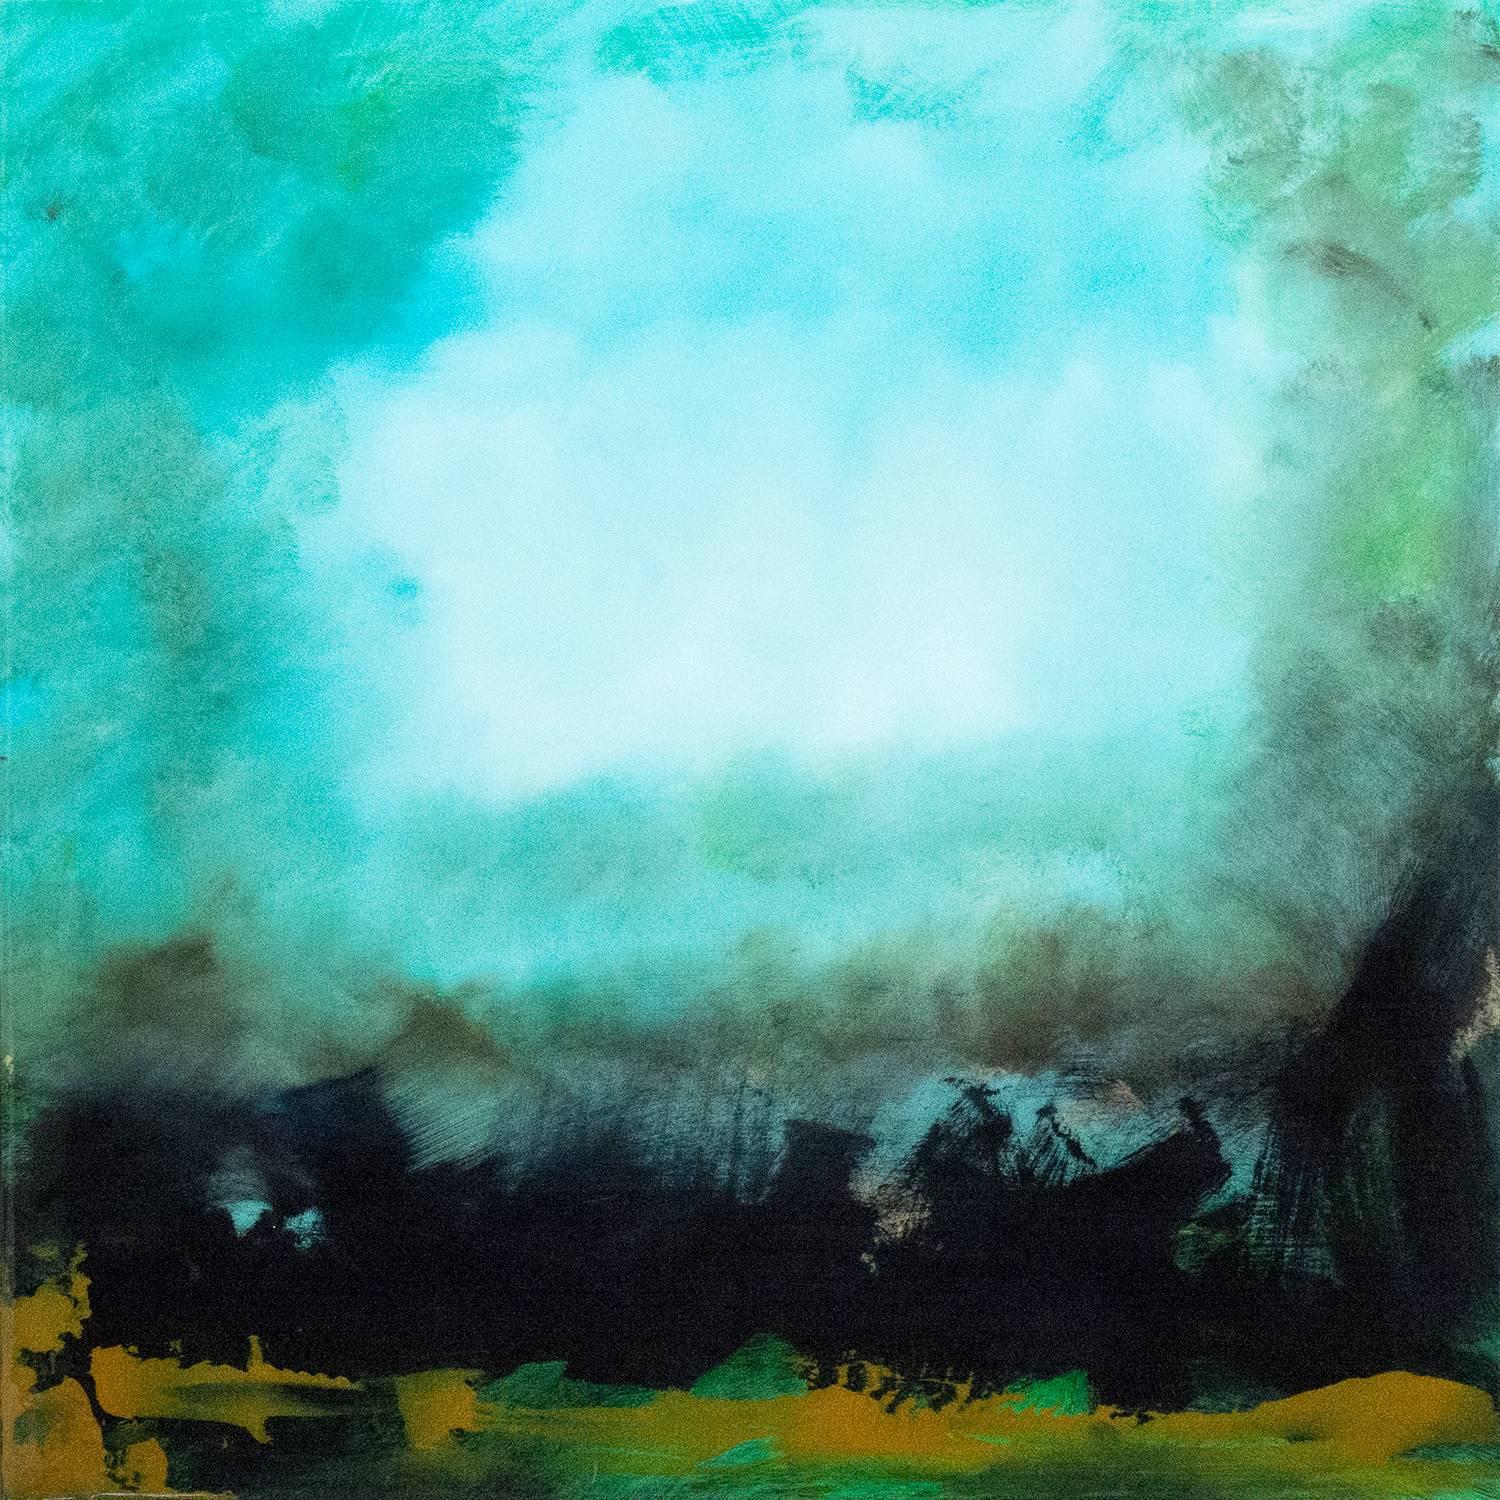 Jay Hodgins Abstract Painting - Rujuh 5 - atmospheric, colourful, abstract landscape, acrylic, resin on panel